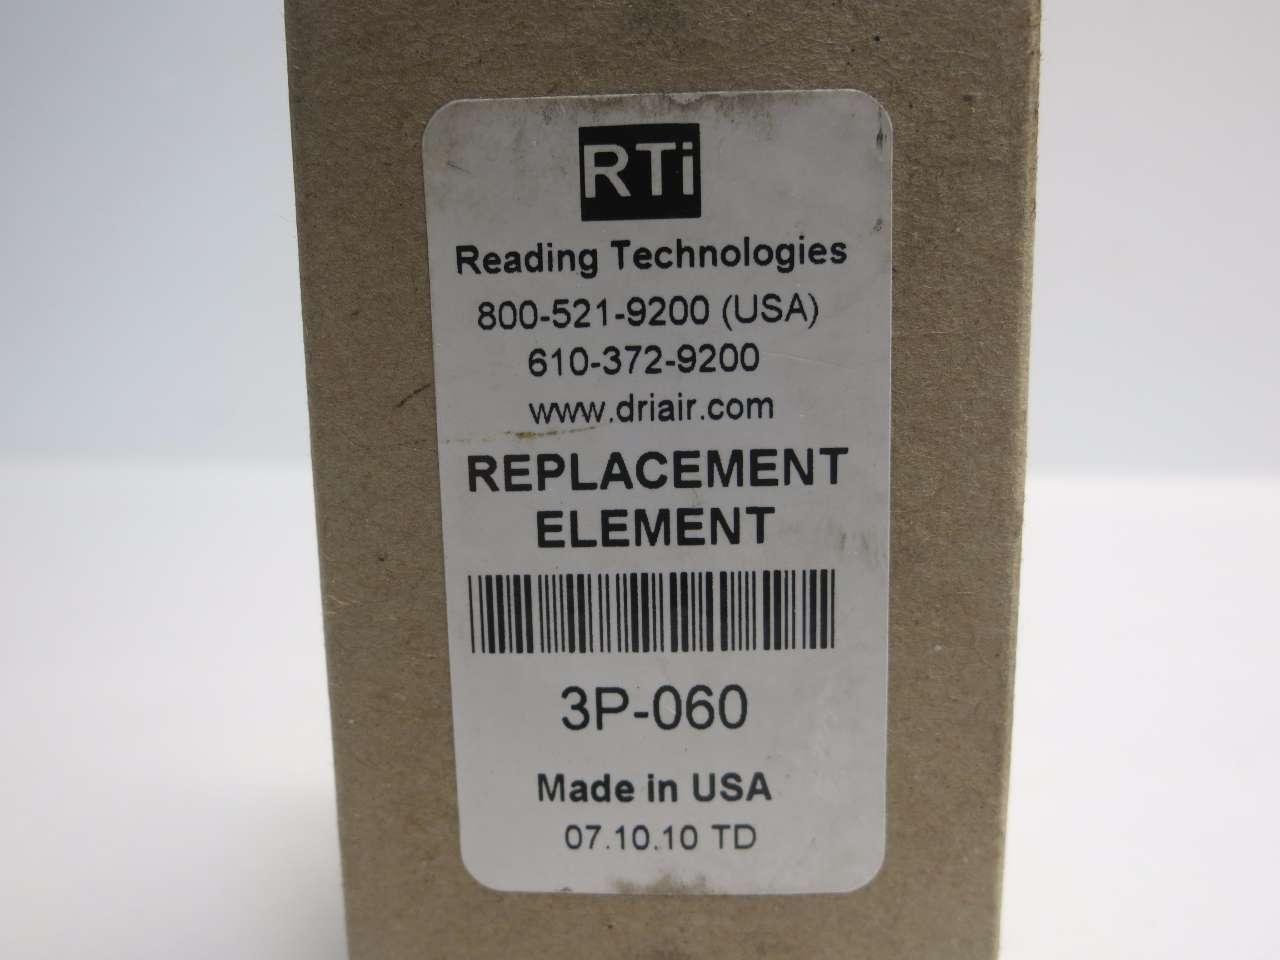 NEW READING TECHNOLOGIES FILTER REPLACEMENT ELEMENT  3P-060 